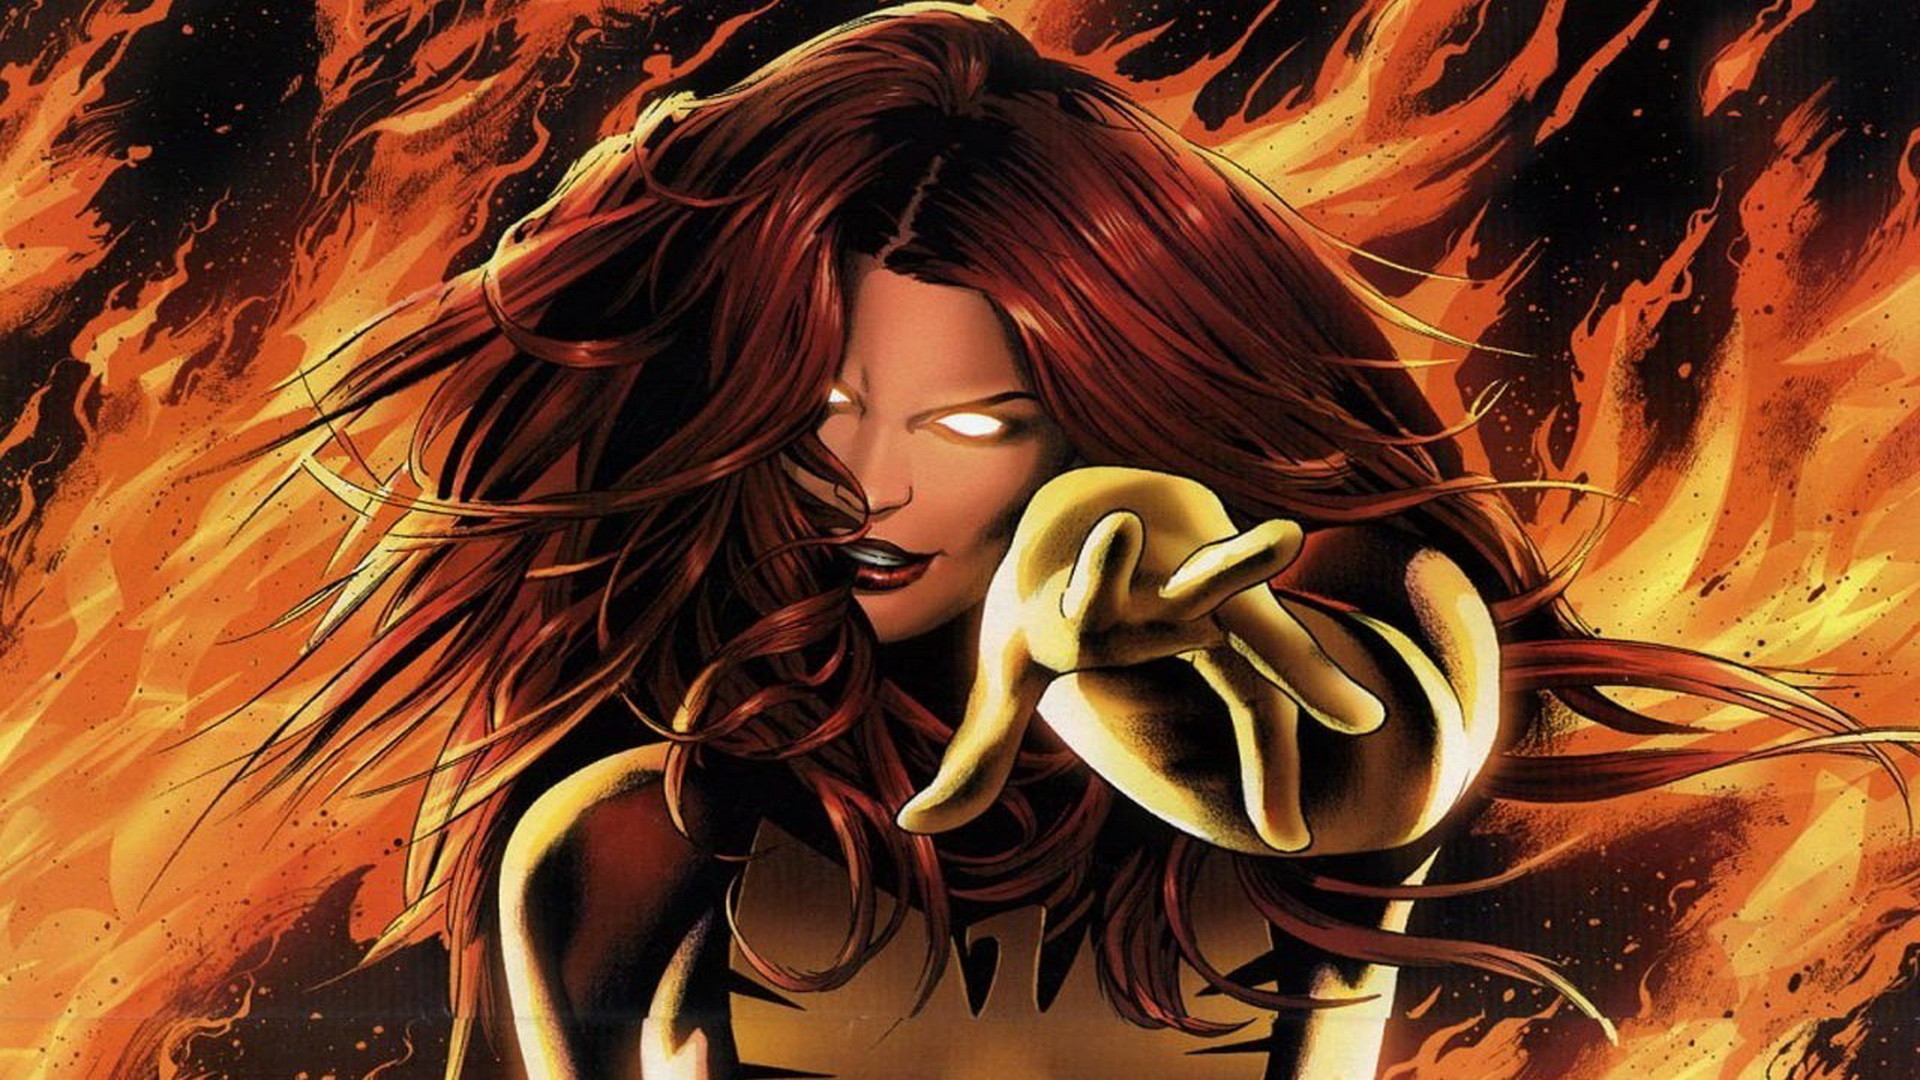 1920x1080 My new wallpaper from the X-Men comicbook series Phoenix Endsong which is  composed of 5 comics. X-Men Phoenix Endsong